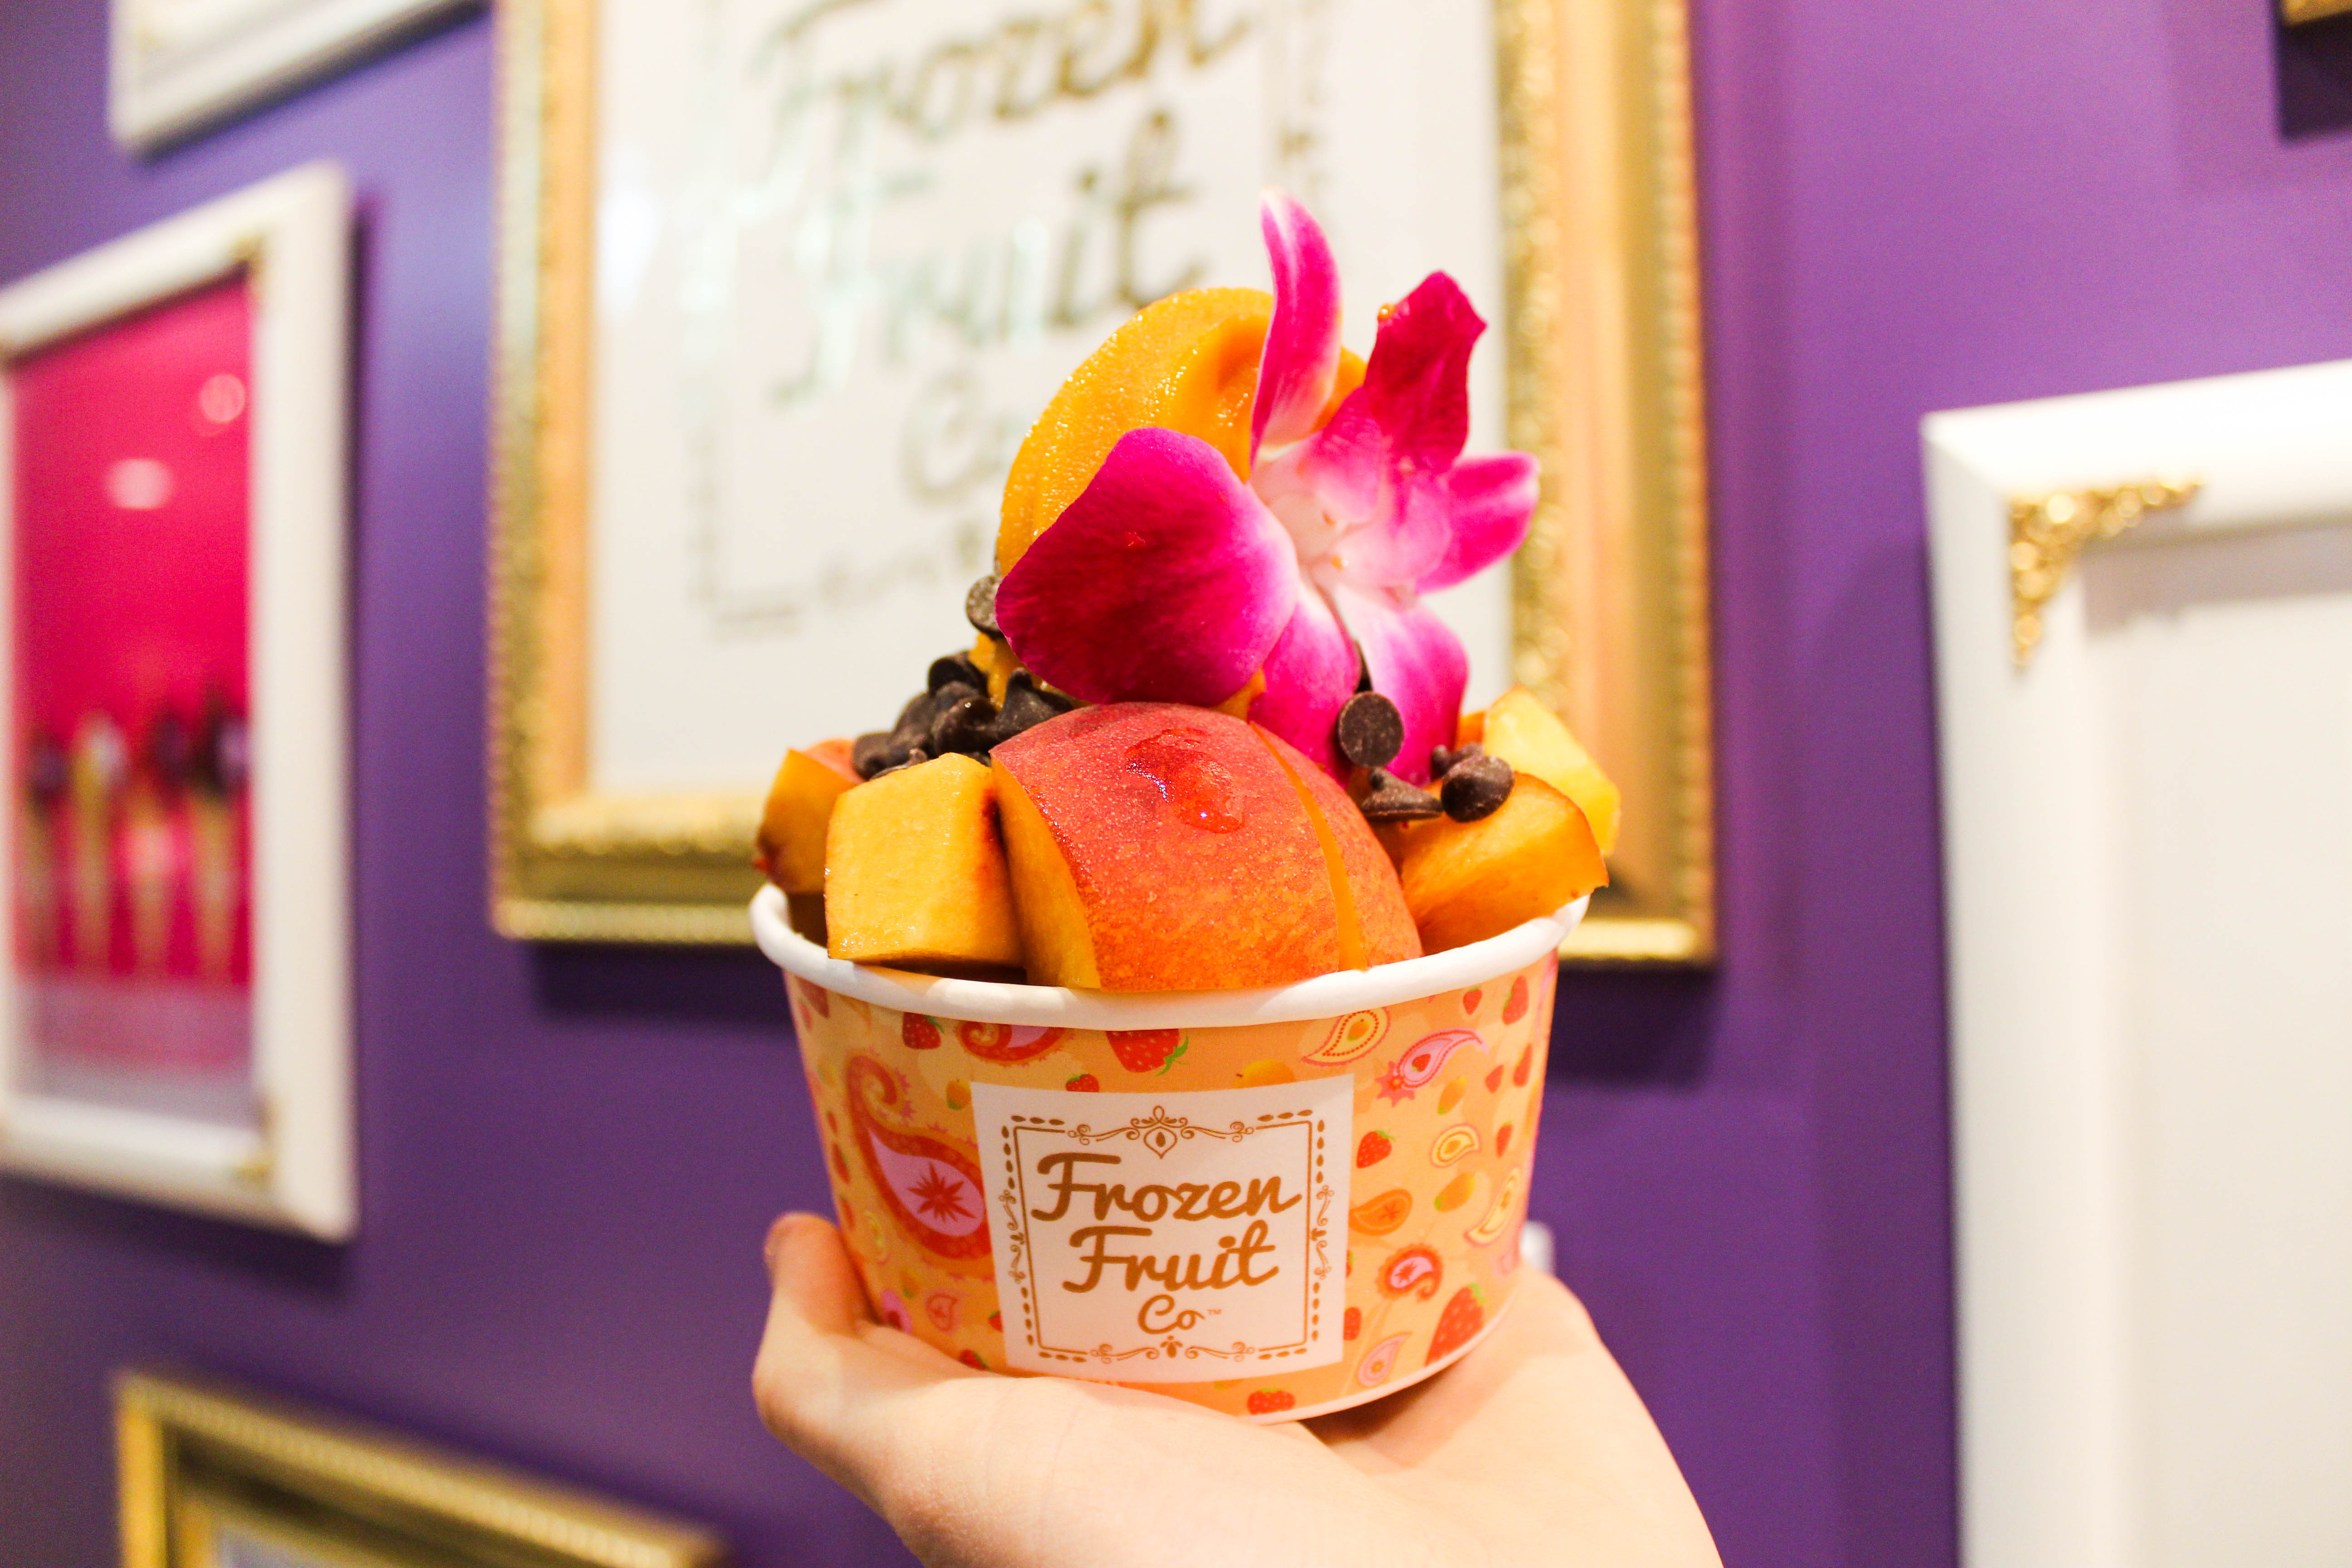 Newest Addiction: FroFru at Frozen Fruit Co